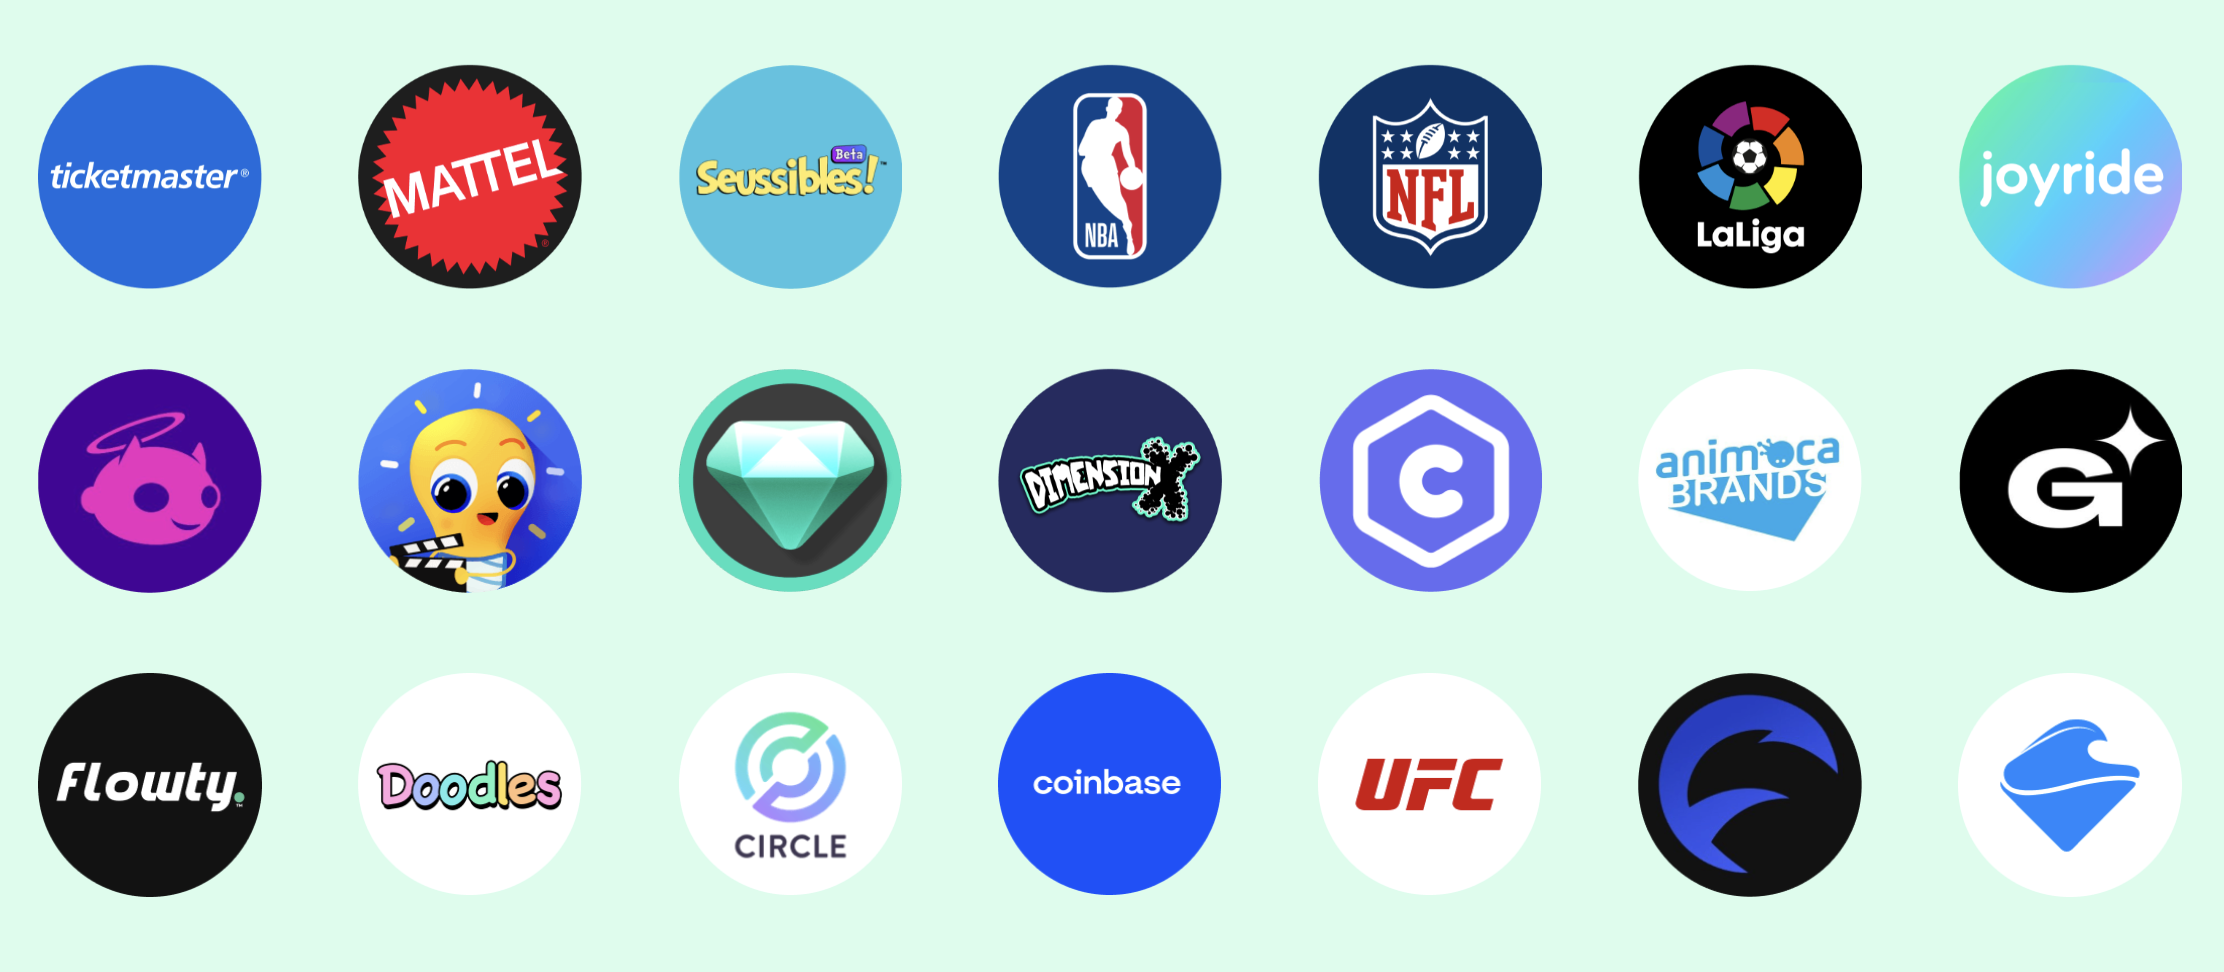 Image of the many brands that use the Flow blockchain.